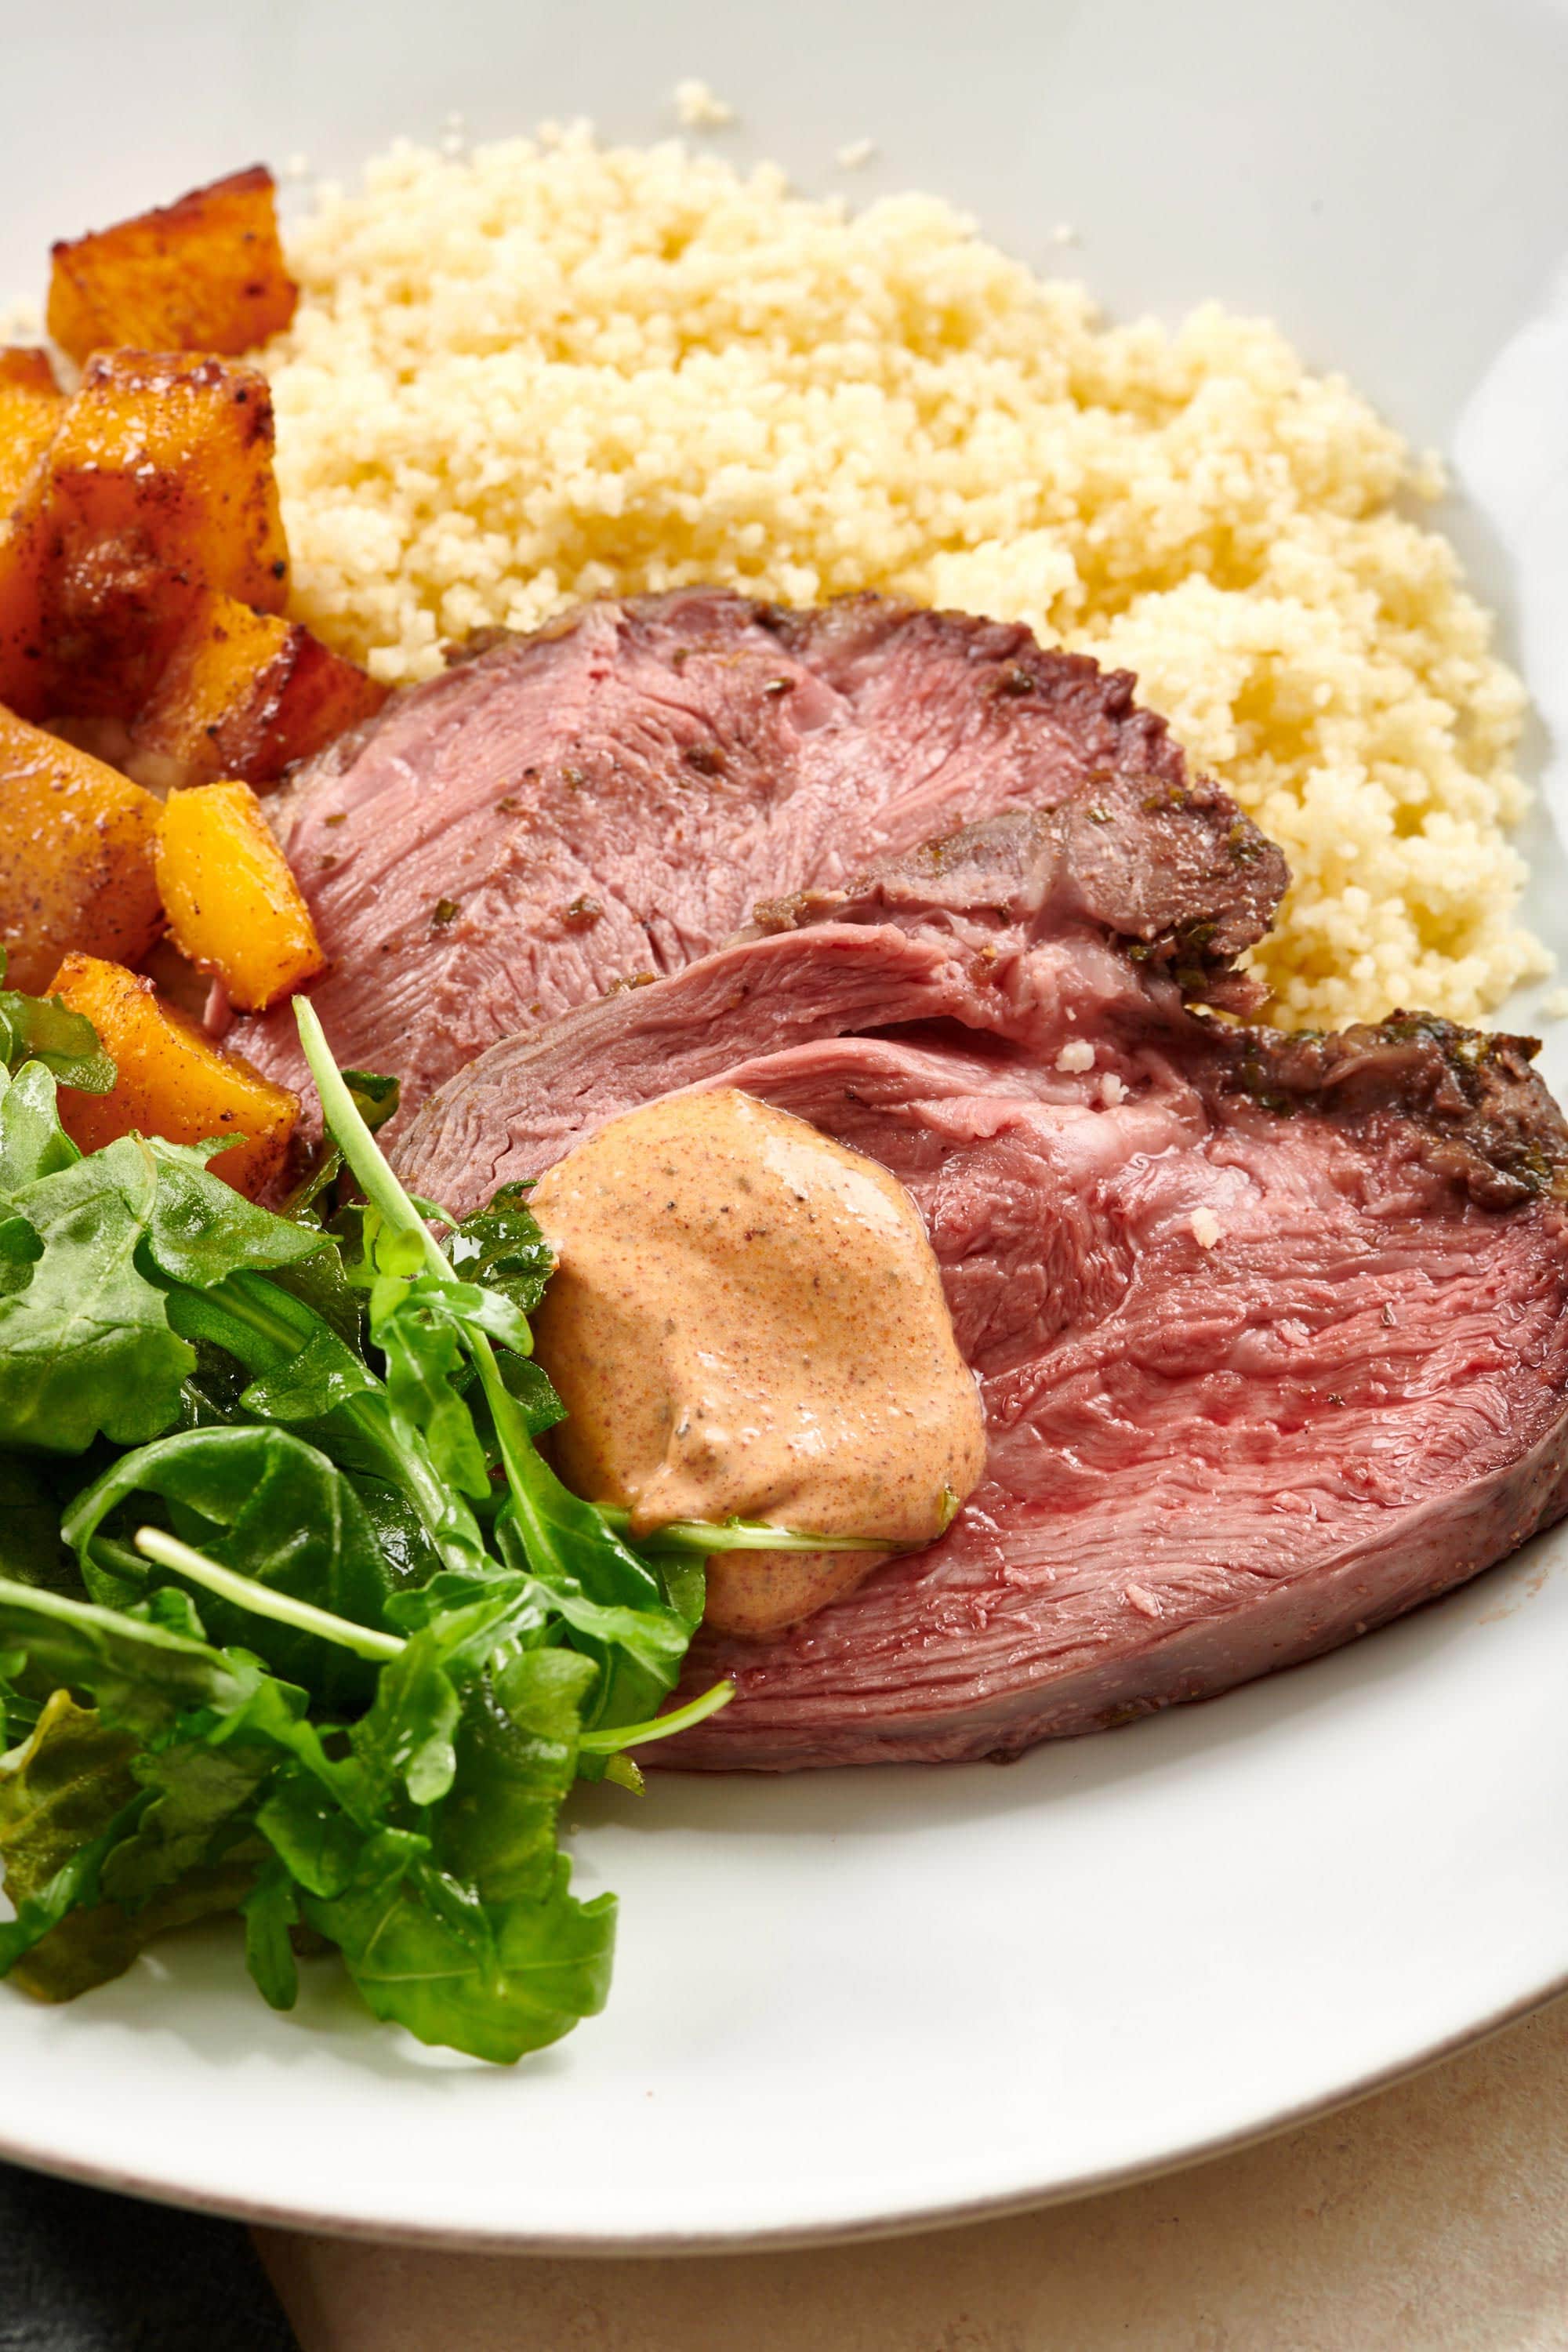 Sliced Lamb topped with harissa sauce and on a plate with arugula, squash, and couscous.